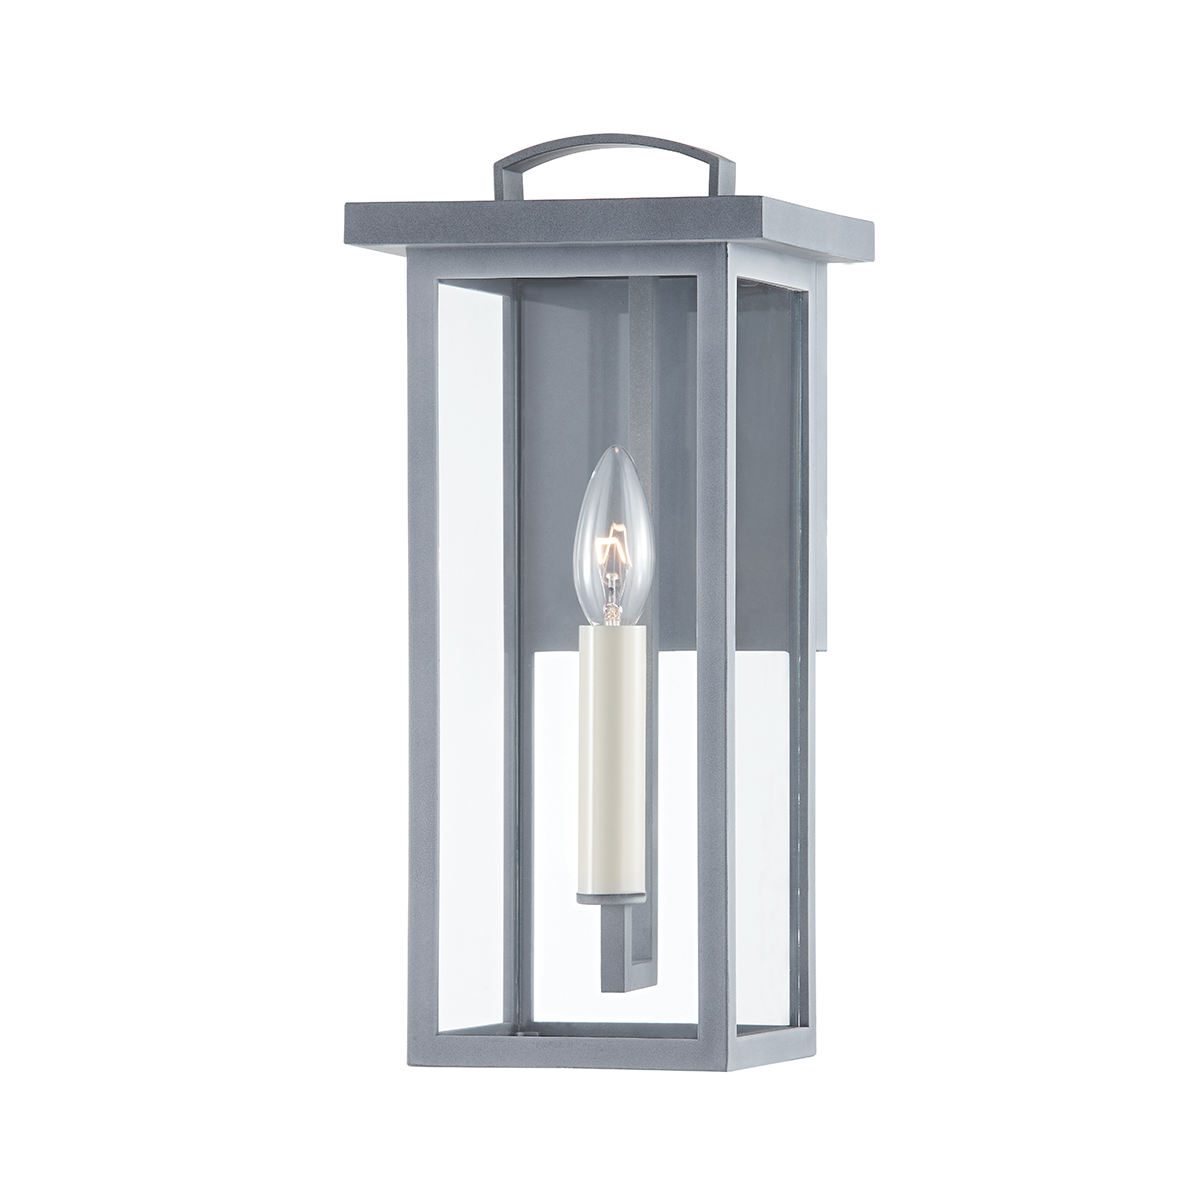 Troy EDEN 1 LIGHT SMALL EXTERIOR WALL SCONCE B7521 Outdoor l Wall Troy Lighting WEATHERED ZINC  